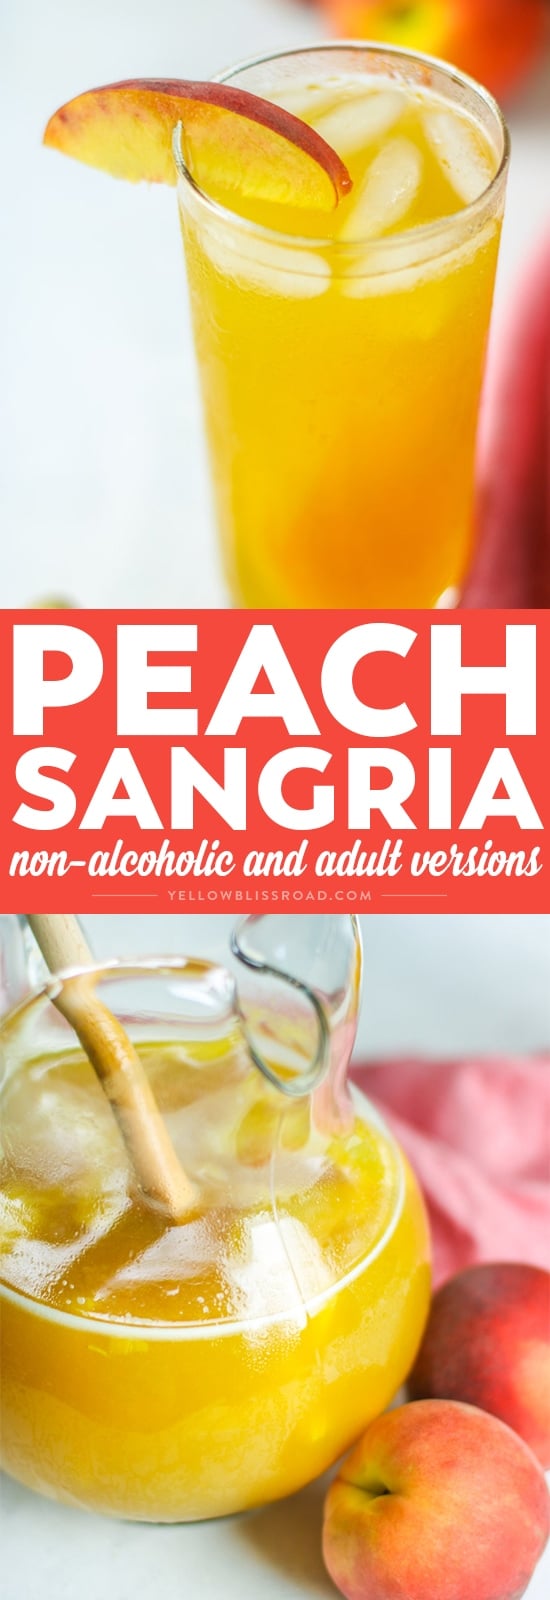 This Peach Sangria is the perfect thing to keep your whole family refreshed this summer, with both non-alcoholic and adult versions.